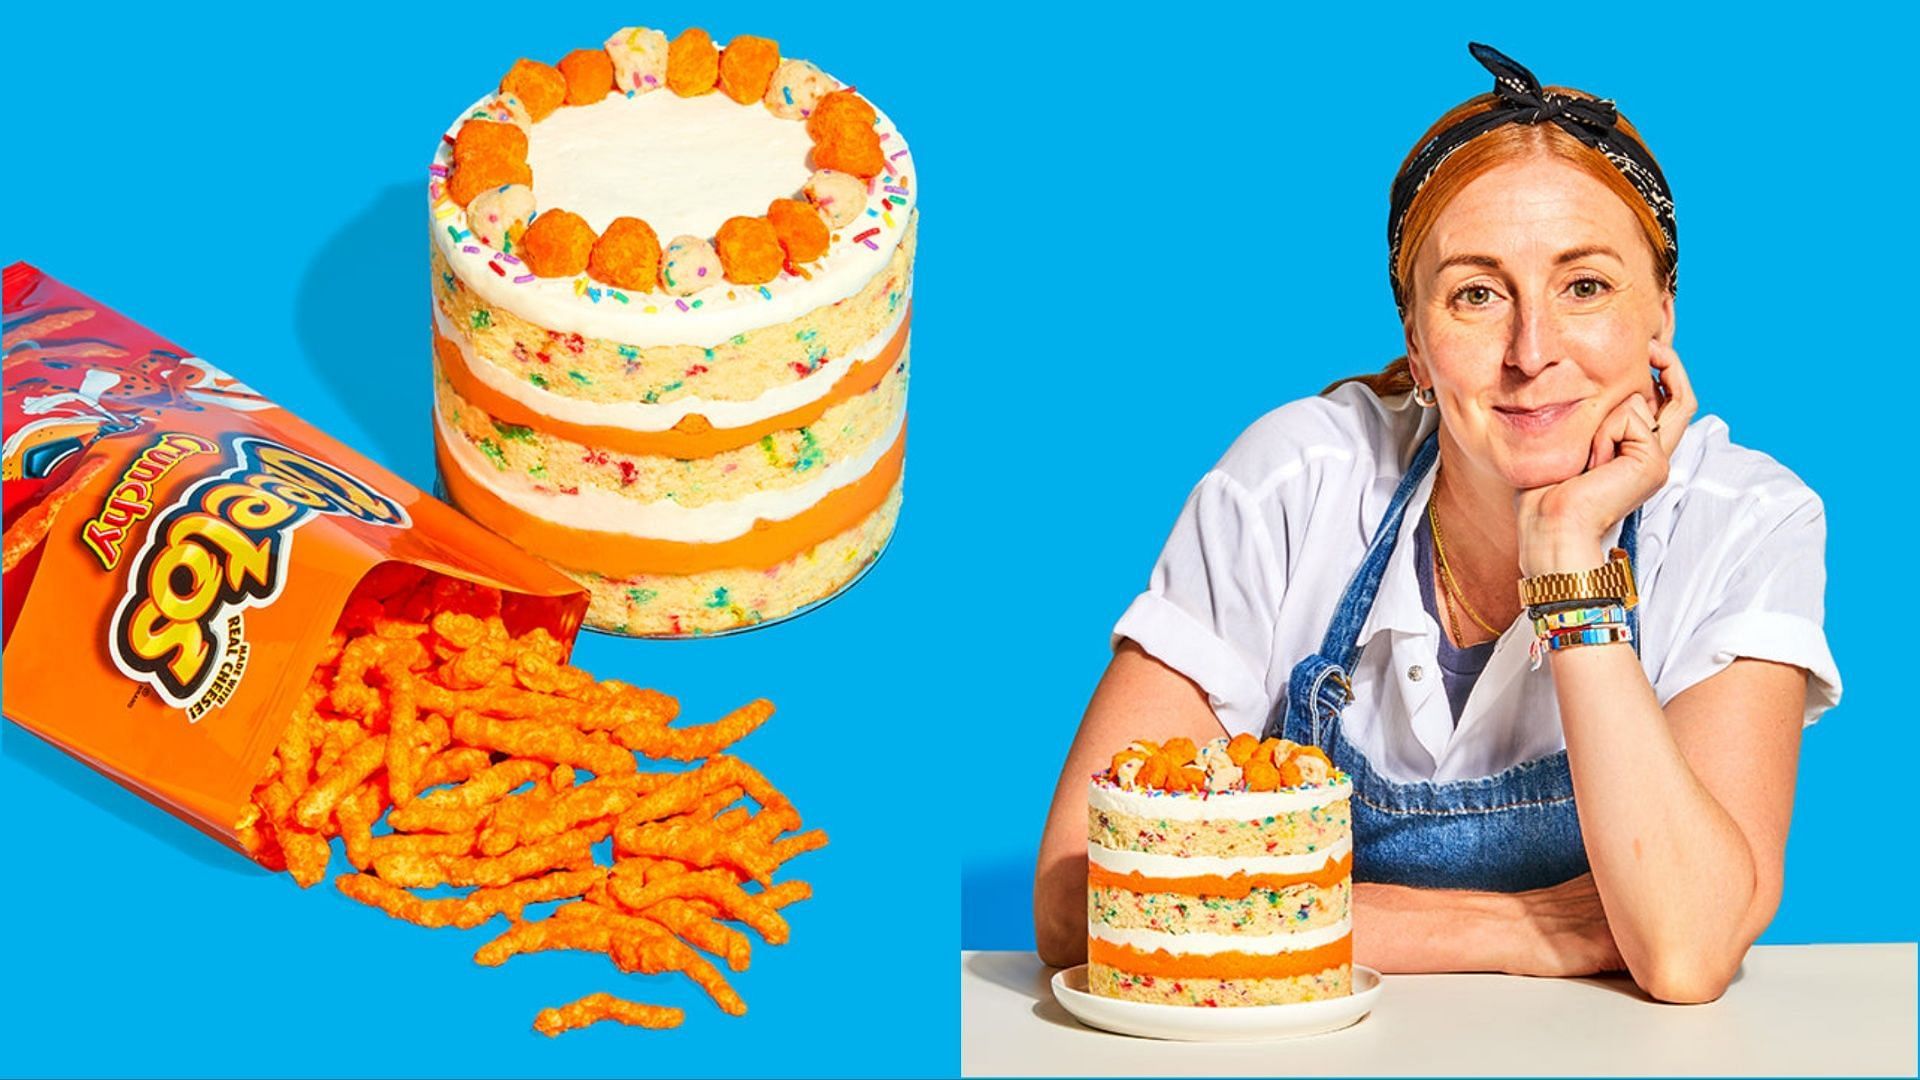 The Cheetos-inspired Milk Bar cake can be enjoyed for a limited time nationwide (Image via PR Newswire)